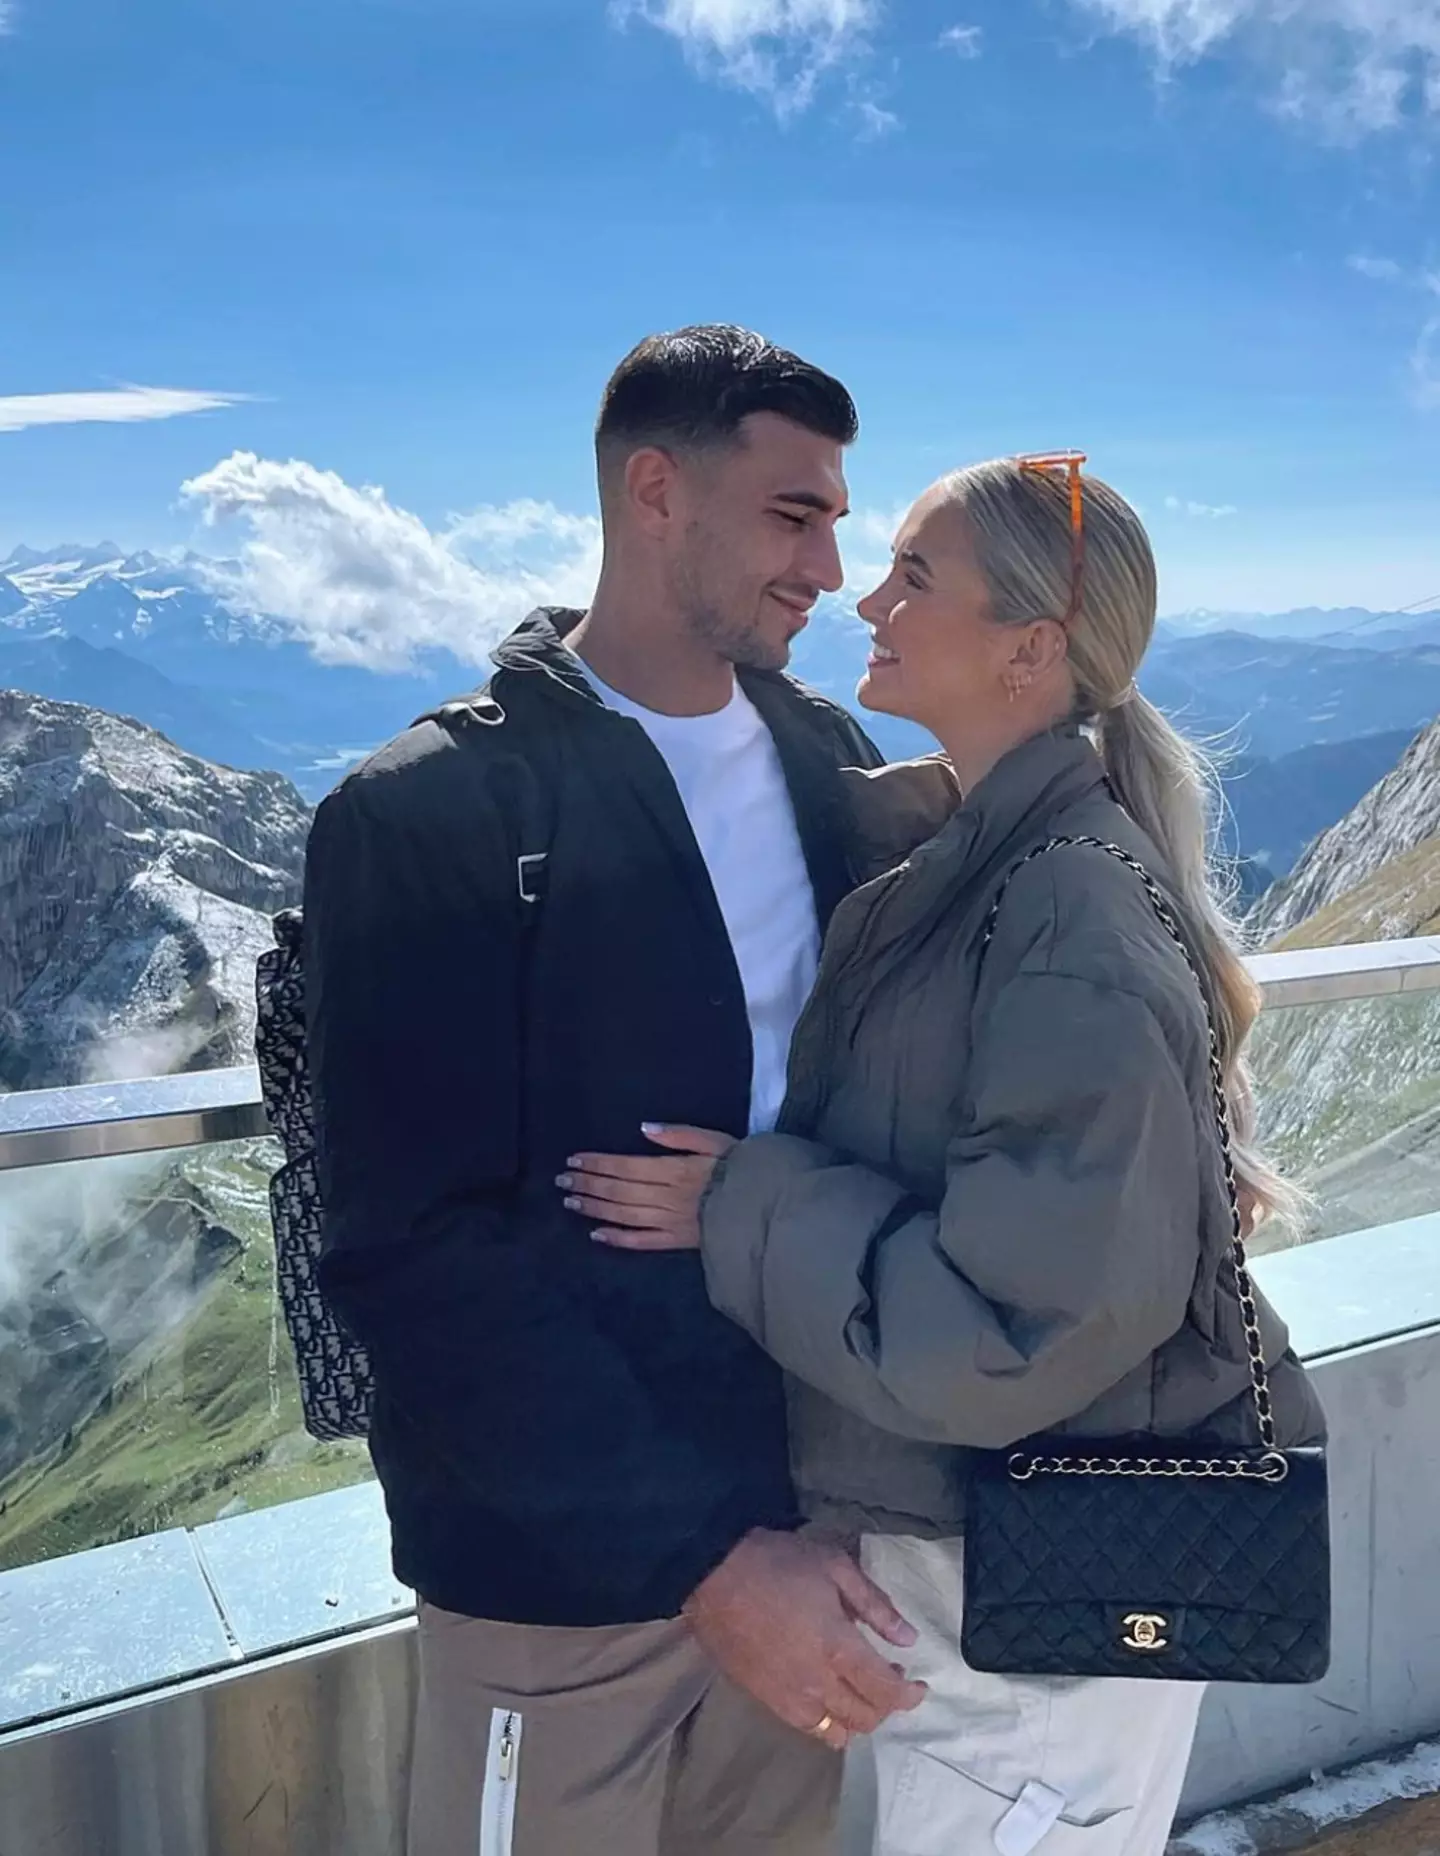 Molly-Mae and her other half, Tommy Fury, announced their pregnancy last month.